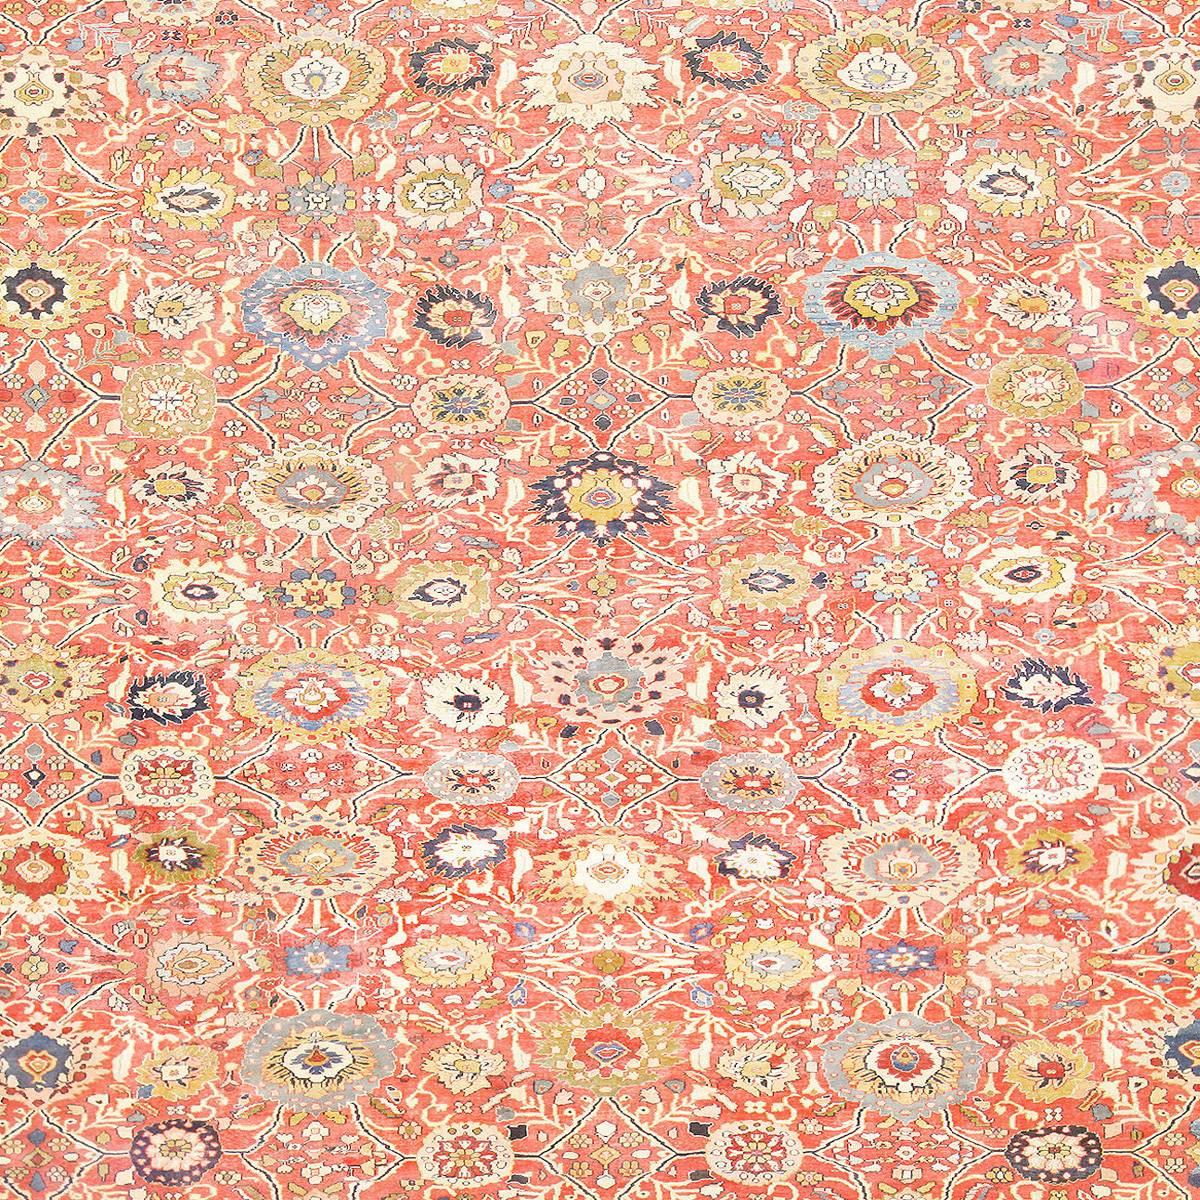 A lively pattern fills this antique Persian rug, covering the large oversized red-orange backdrop with an even array of blossoms in yellow, white, red and blue. Dark blue accents and lines give the light hues of this antique Persian Sultanabad rug